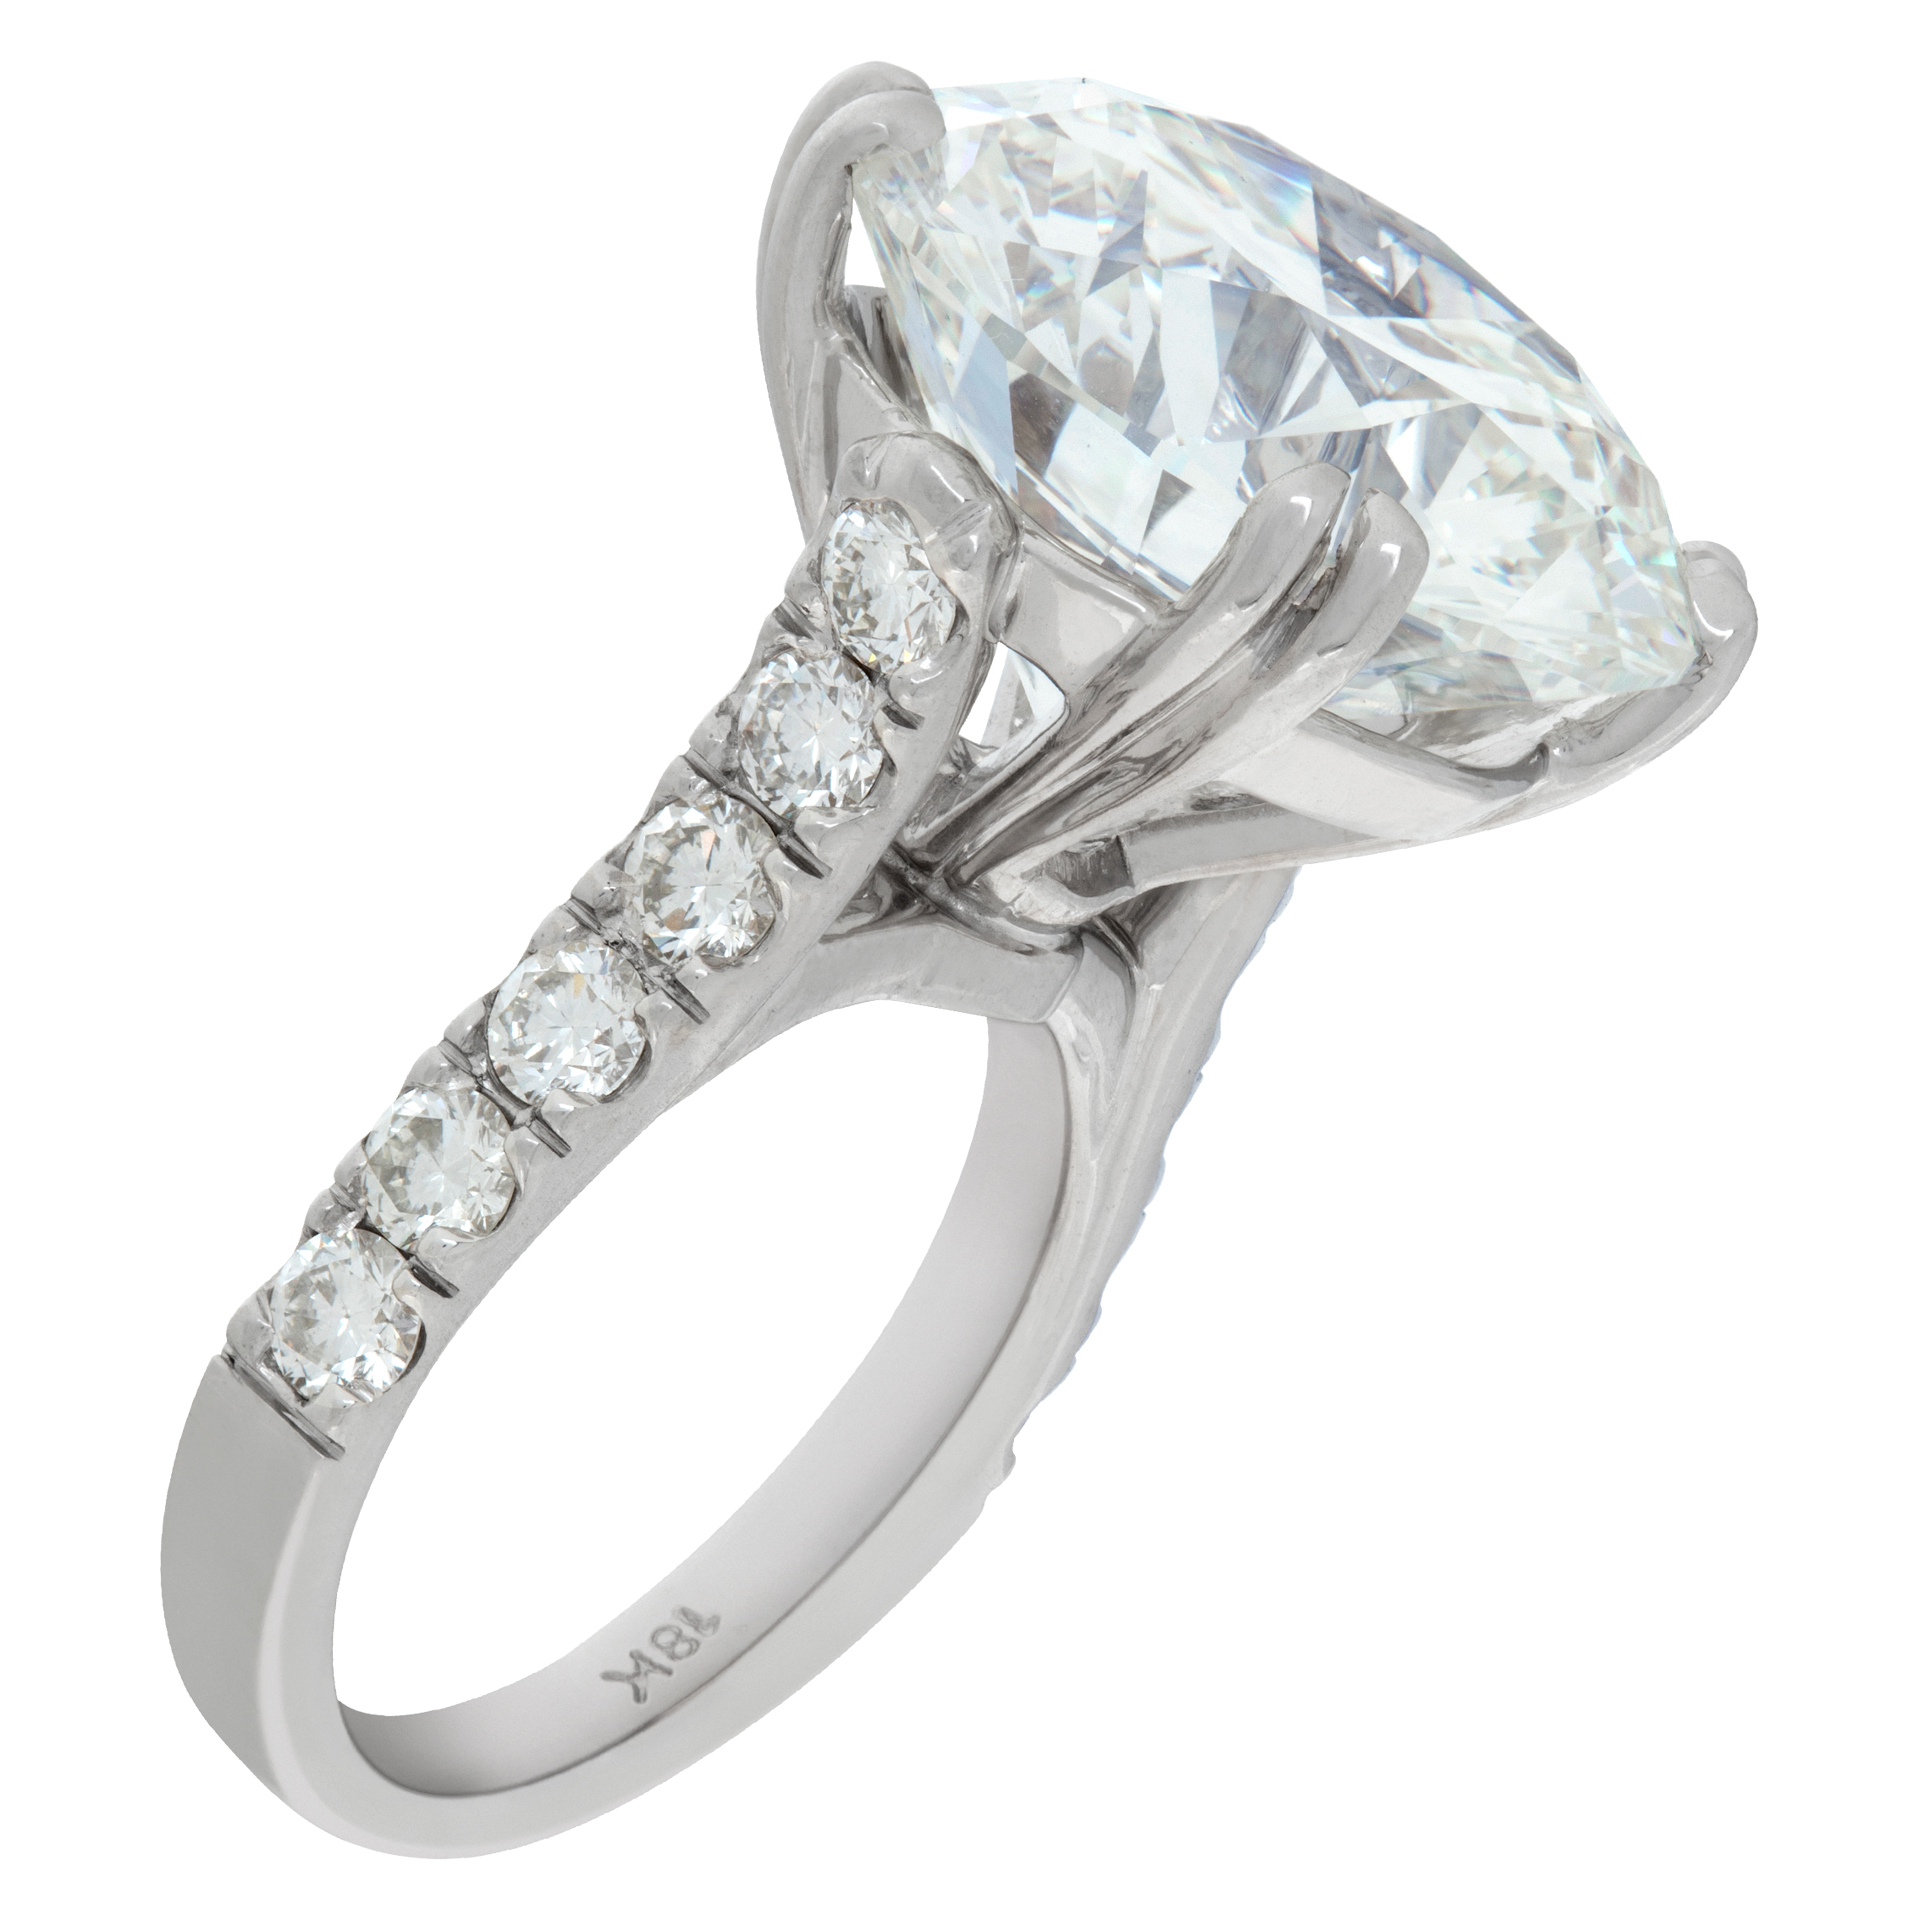 GIA Certified 16.92 carats round brilliant cut diamond set in 18K diamonds white gold ring. I color, image 5